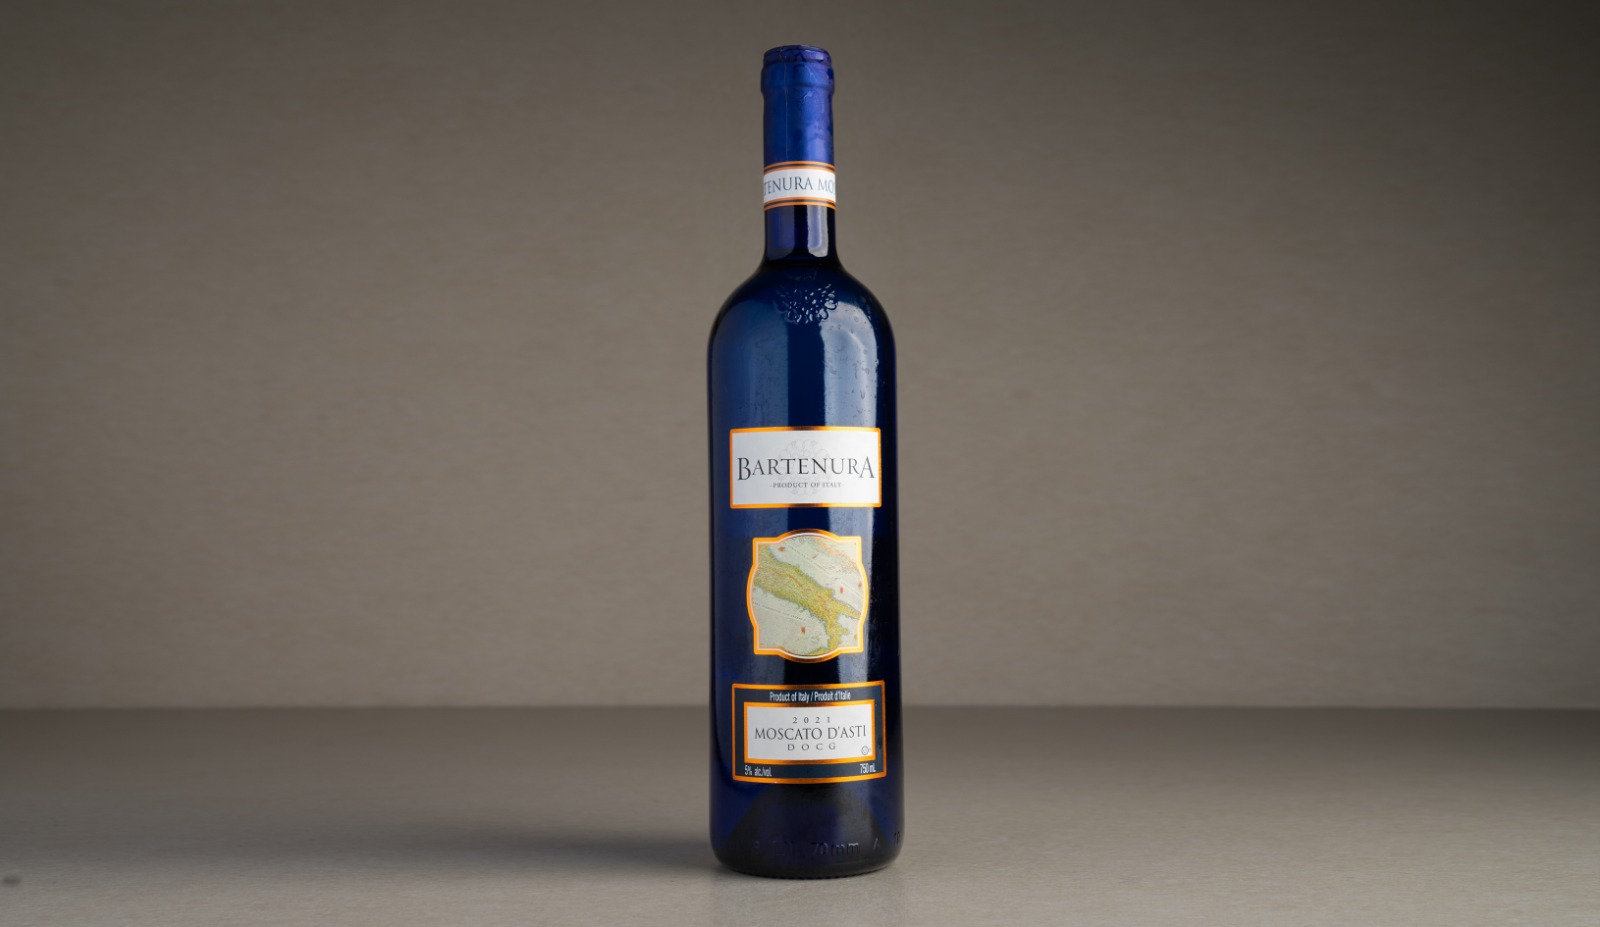 A sweet white wine with a low alcohol content that bubbles lightly in Bartanura